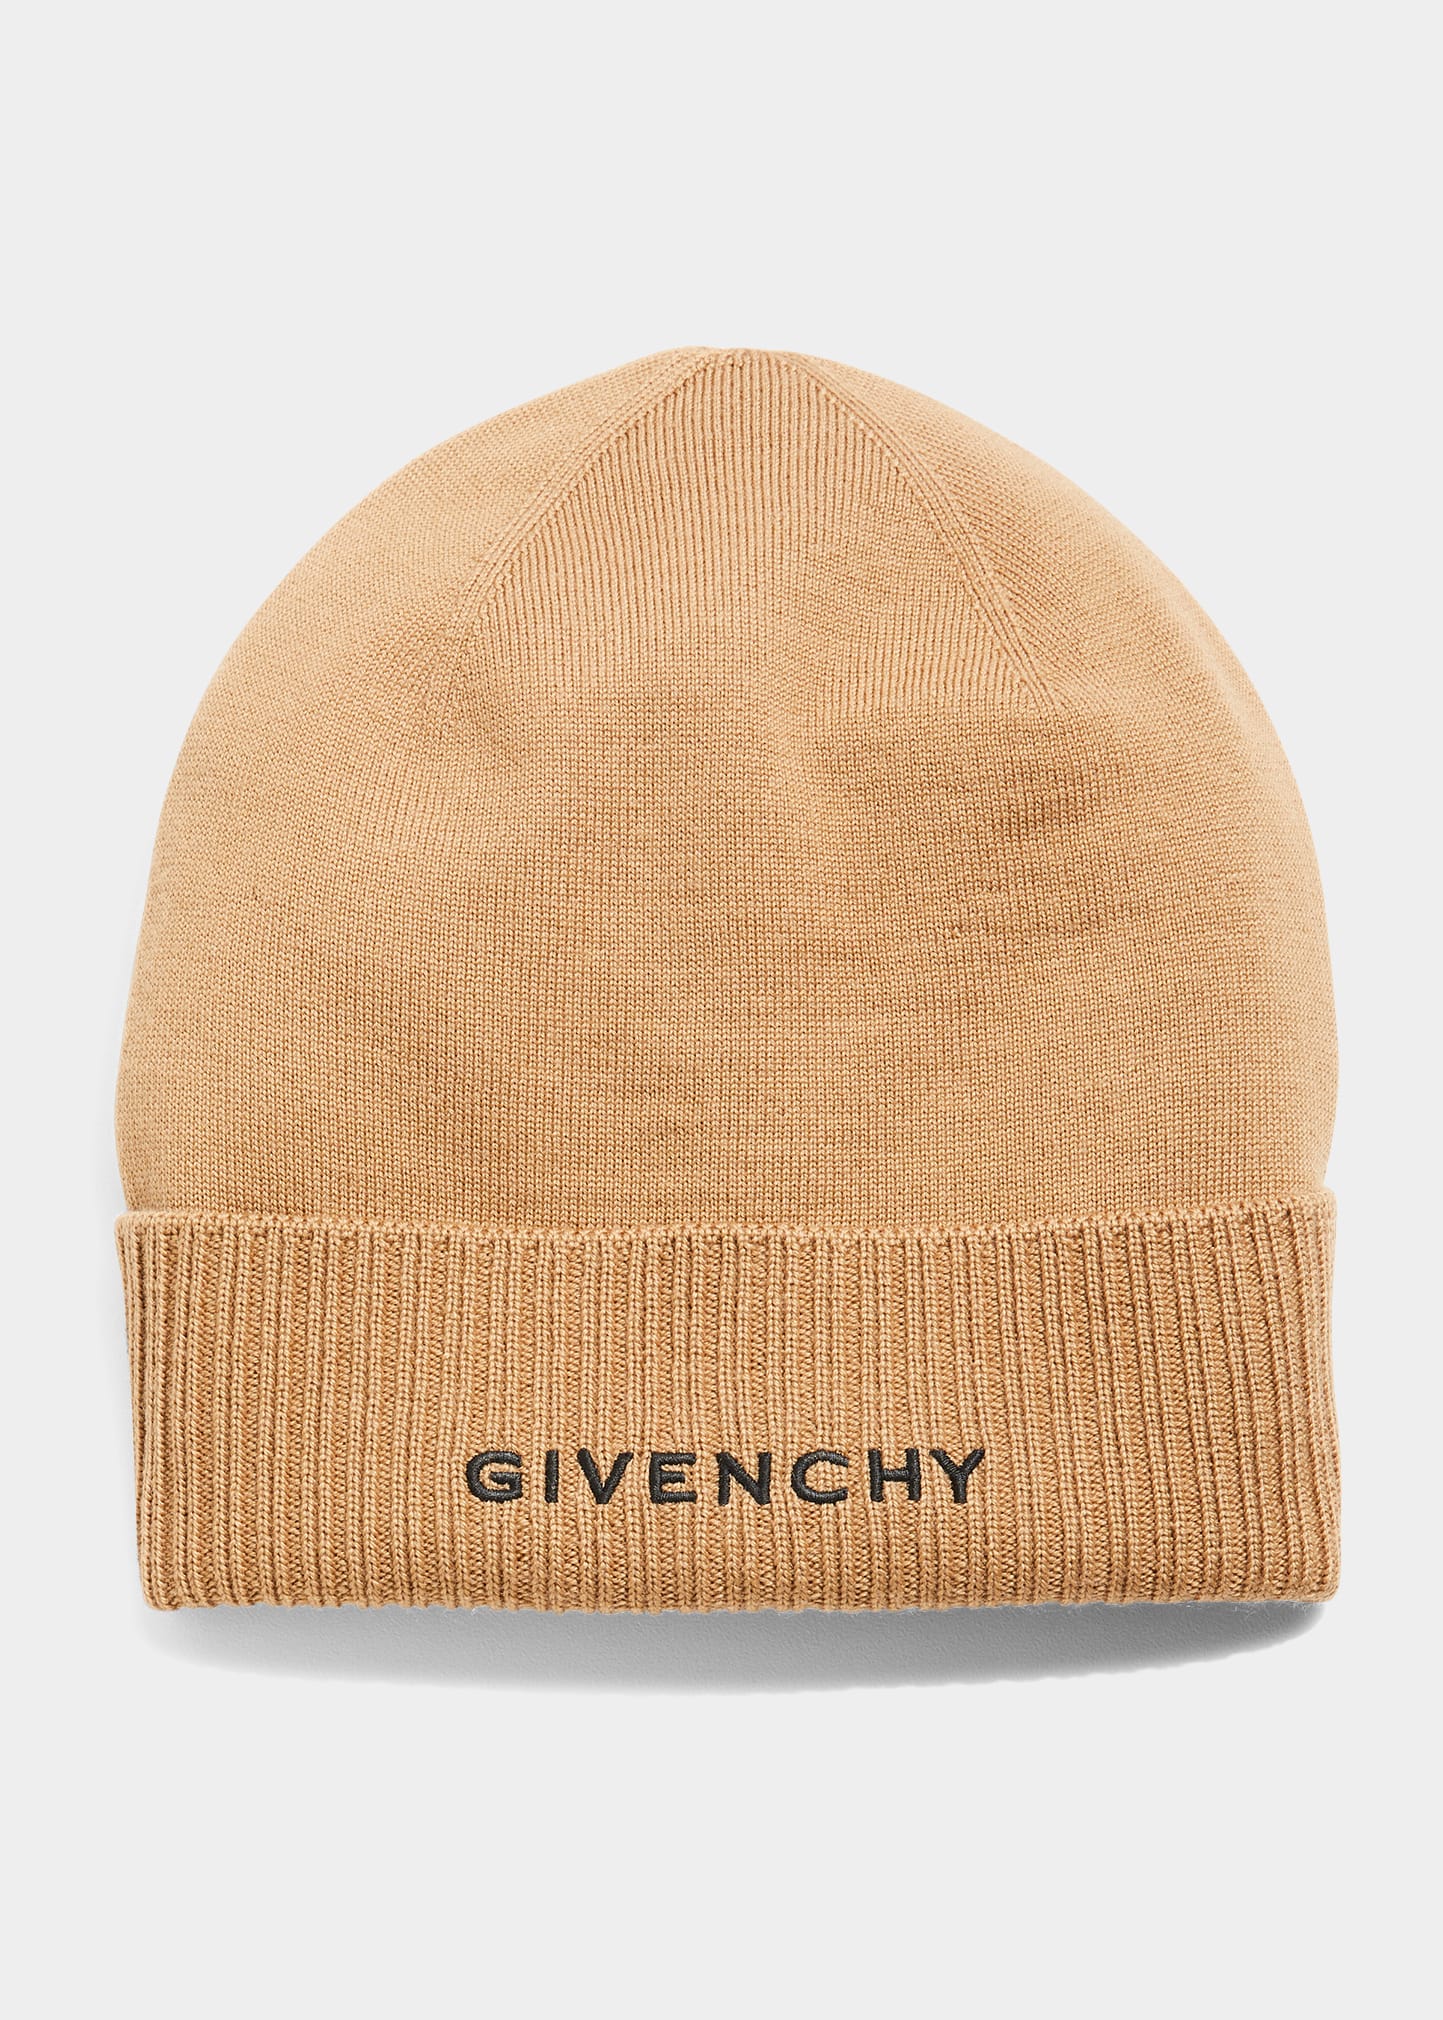 Givenchy Men's Embroidered Logo Wool Beanie Hat In Camel